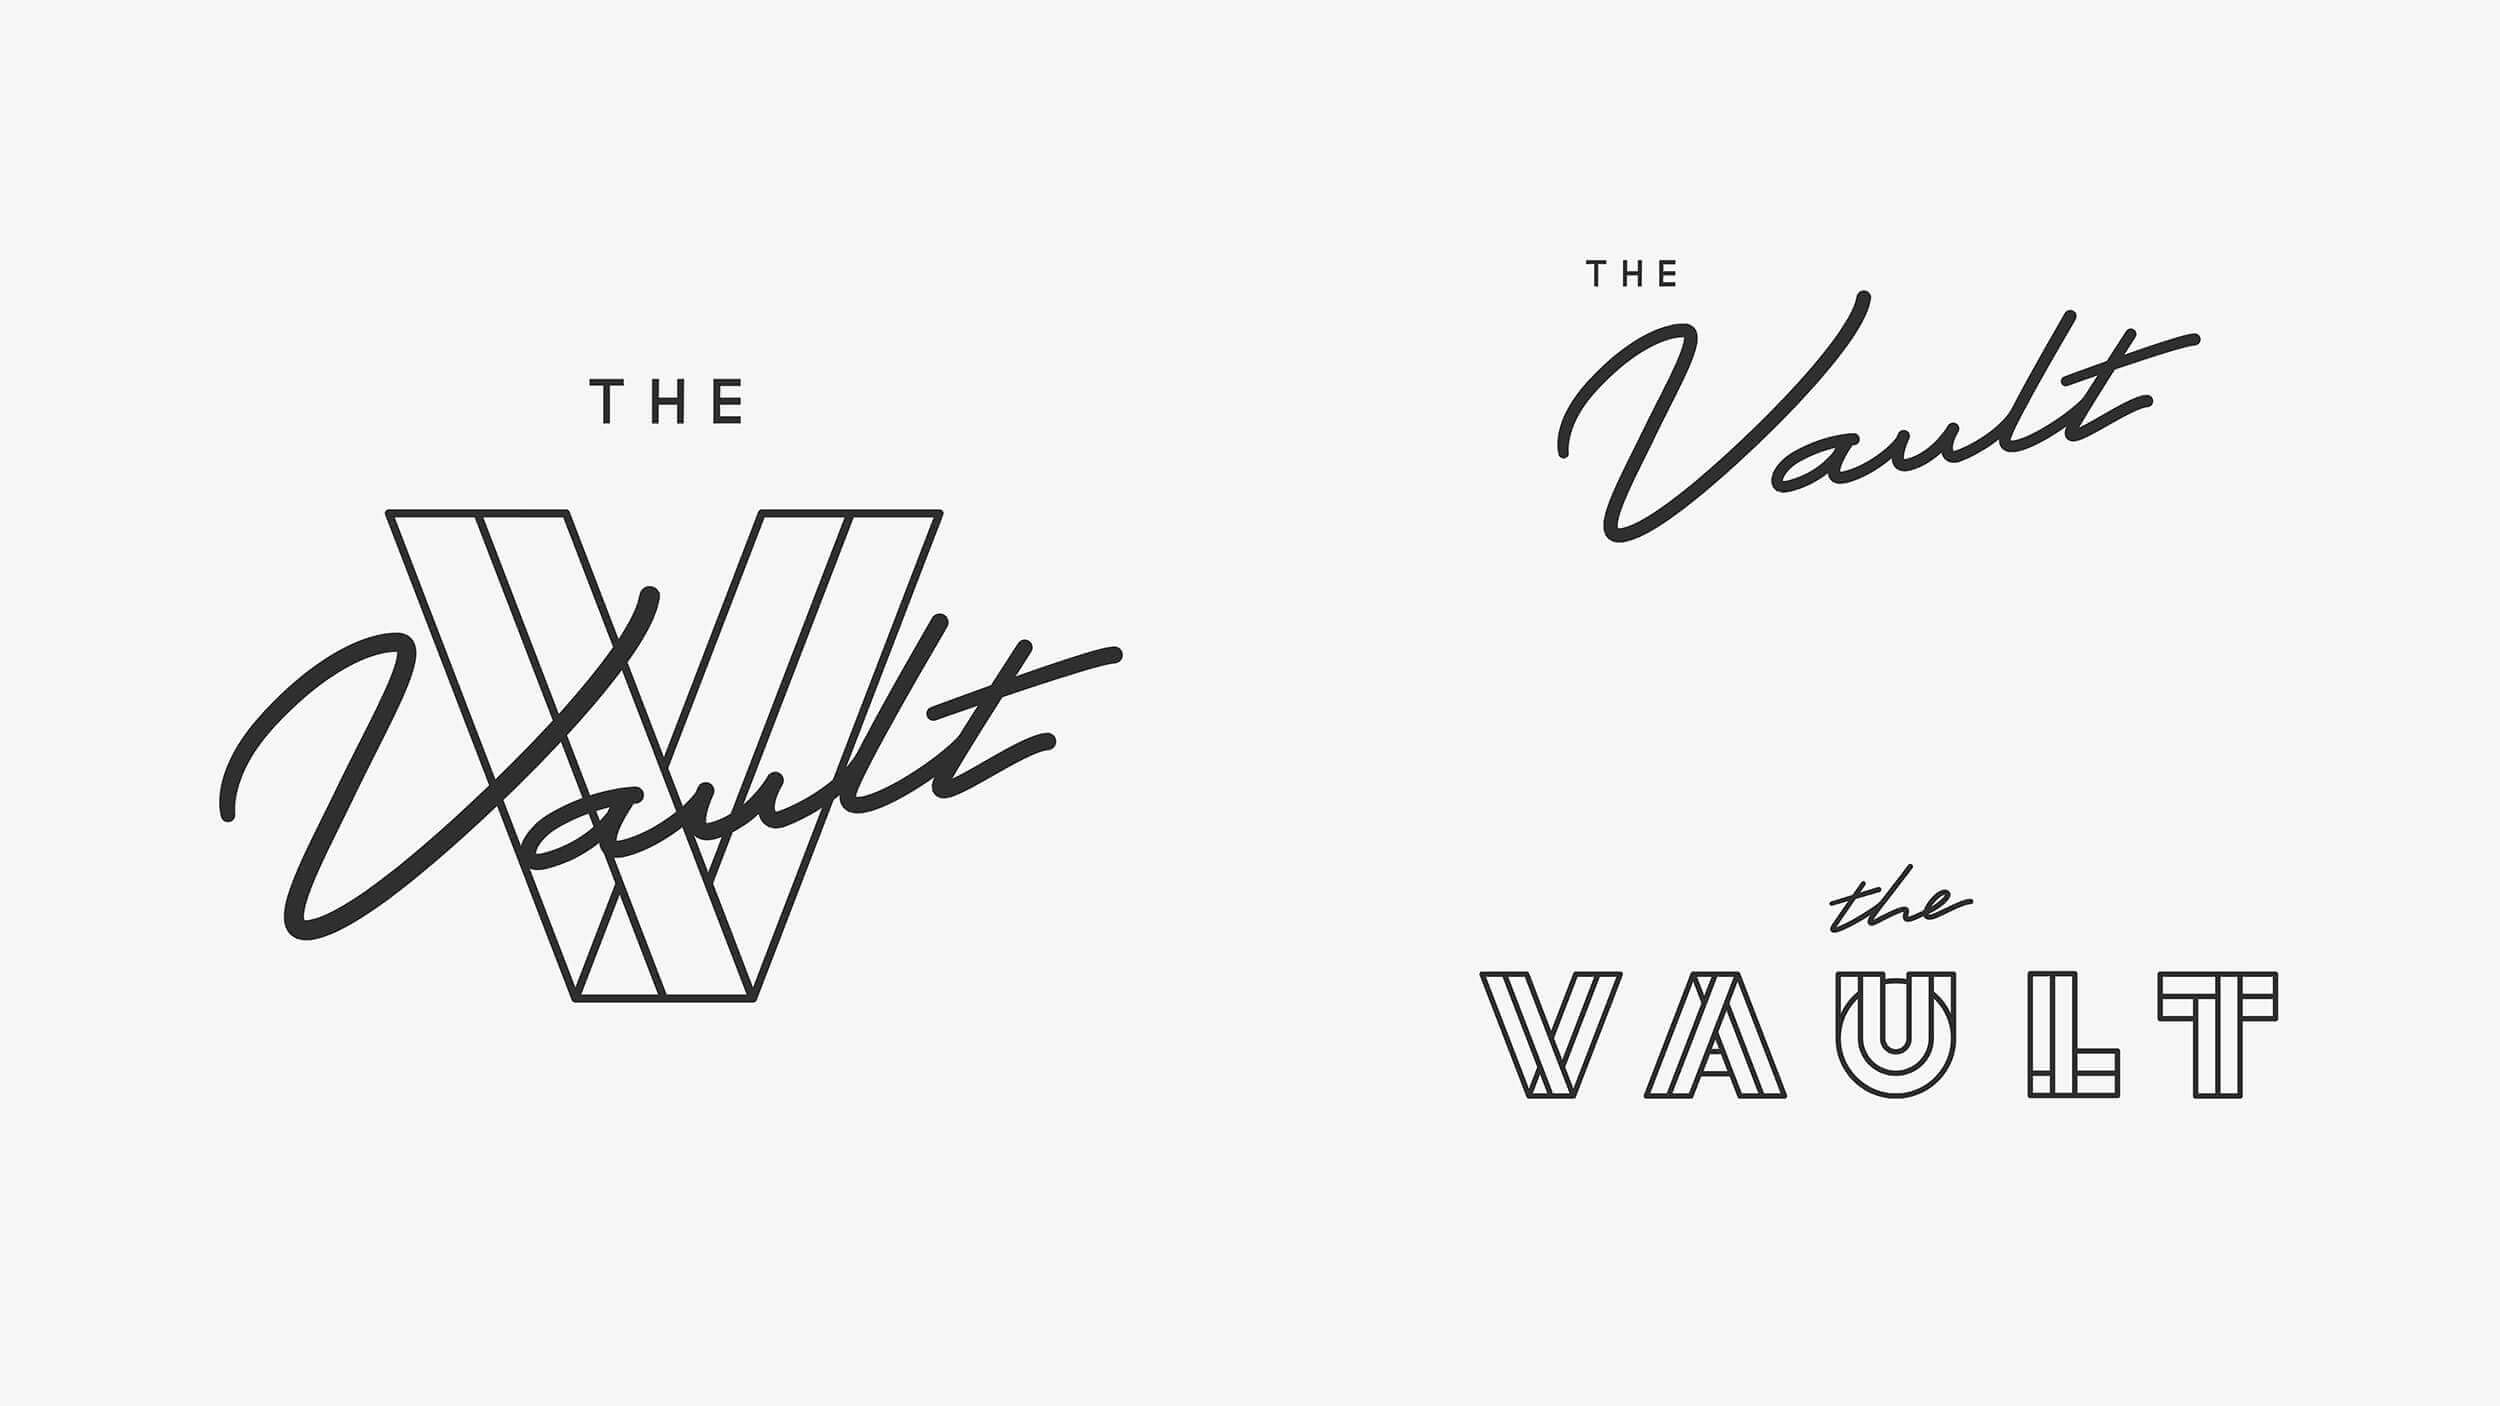 Identity system logos for the Vault featuring one color logo variations